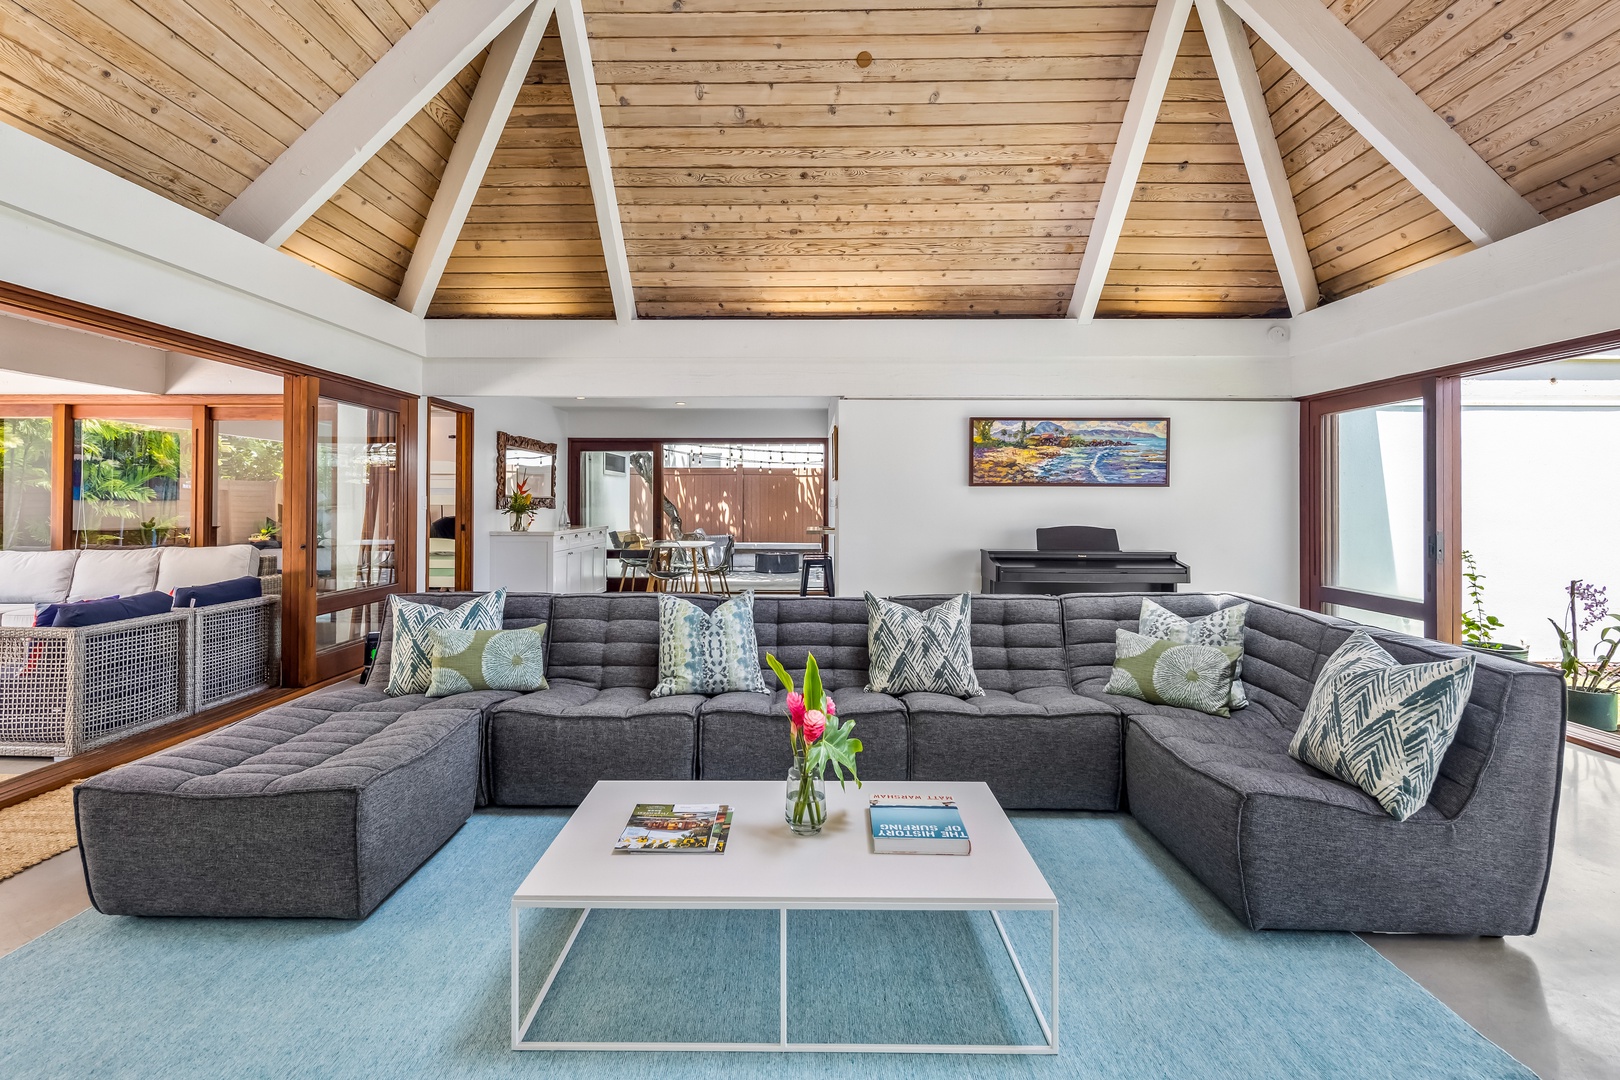 Kailua Vacation Rentals, Lokomaika'i Kailua - Experience the grandeur of a cathedral ceiling in the living area, complemented by a section of glass roofing, allowing an abundance of natural light to cascade in, illuminating the space beautifully.